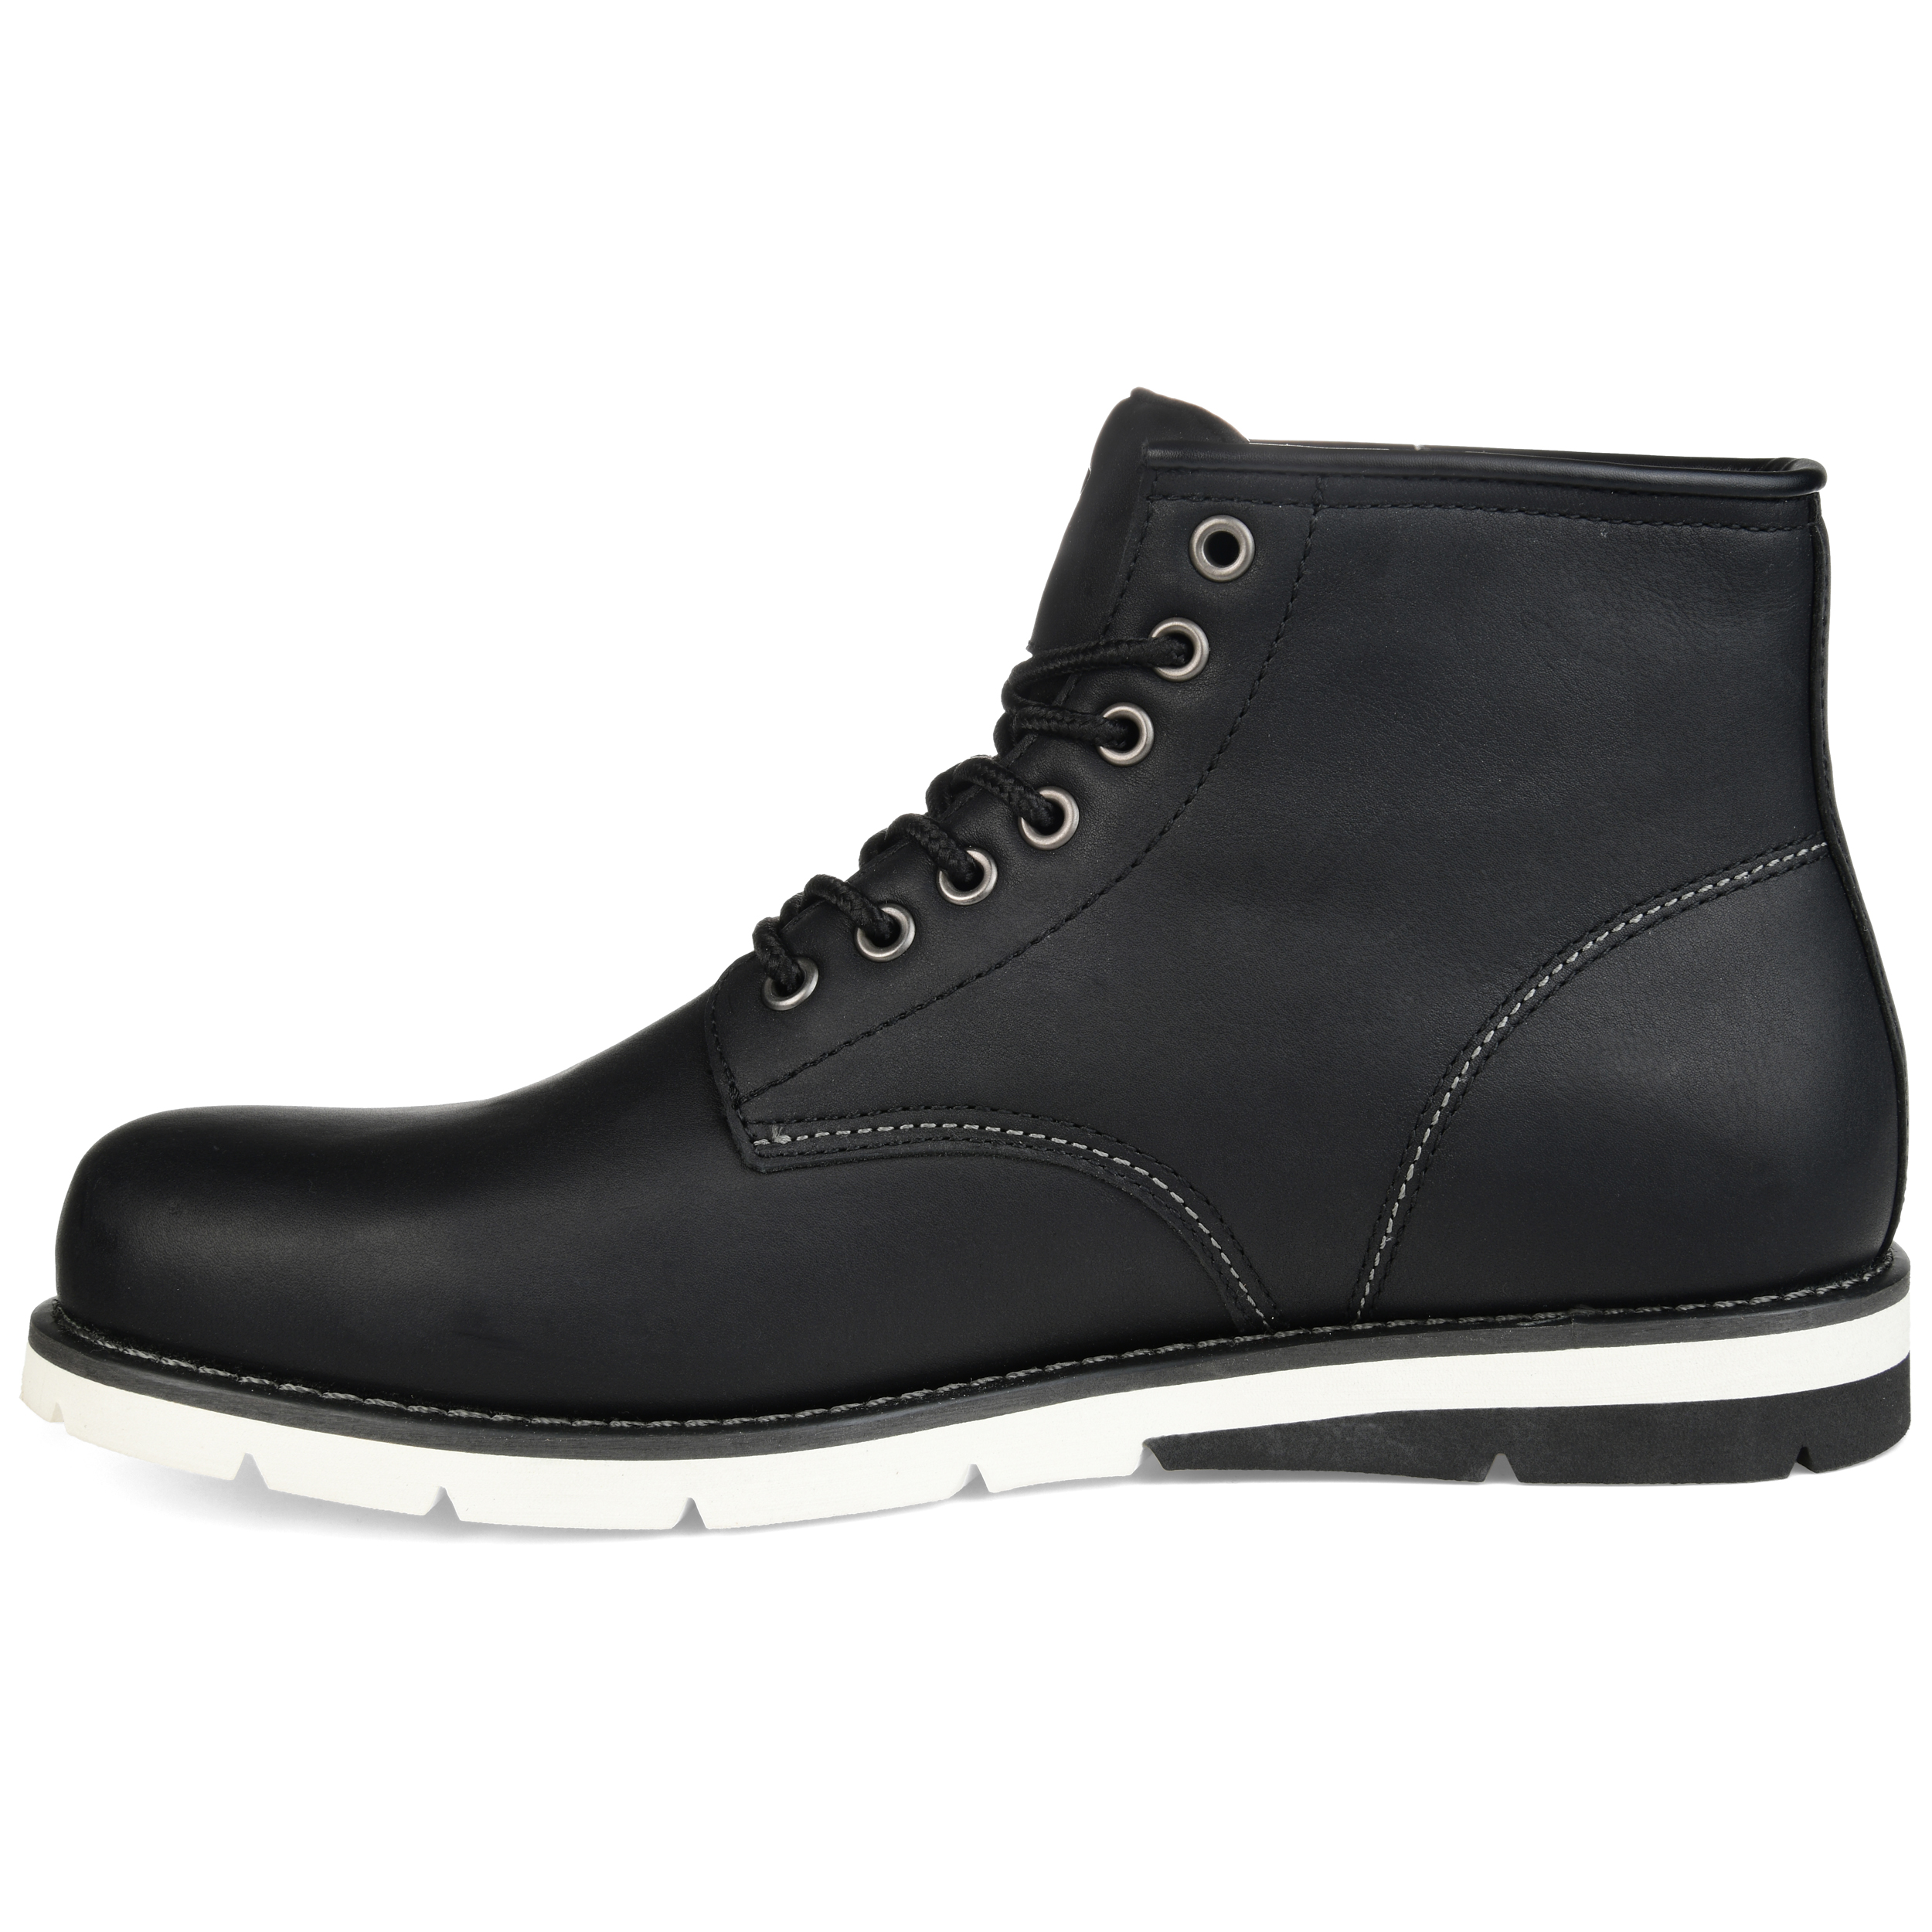 Territory Men's Axel Lace-up Ankle Boot - image 3 of 7